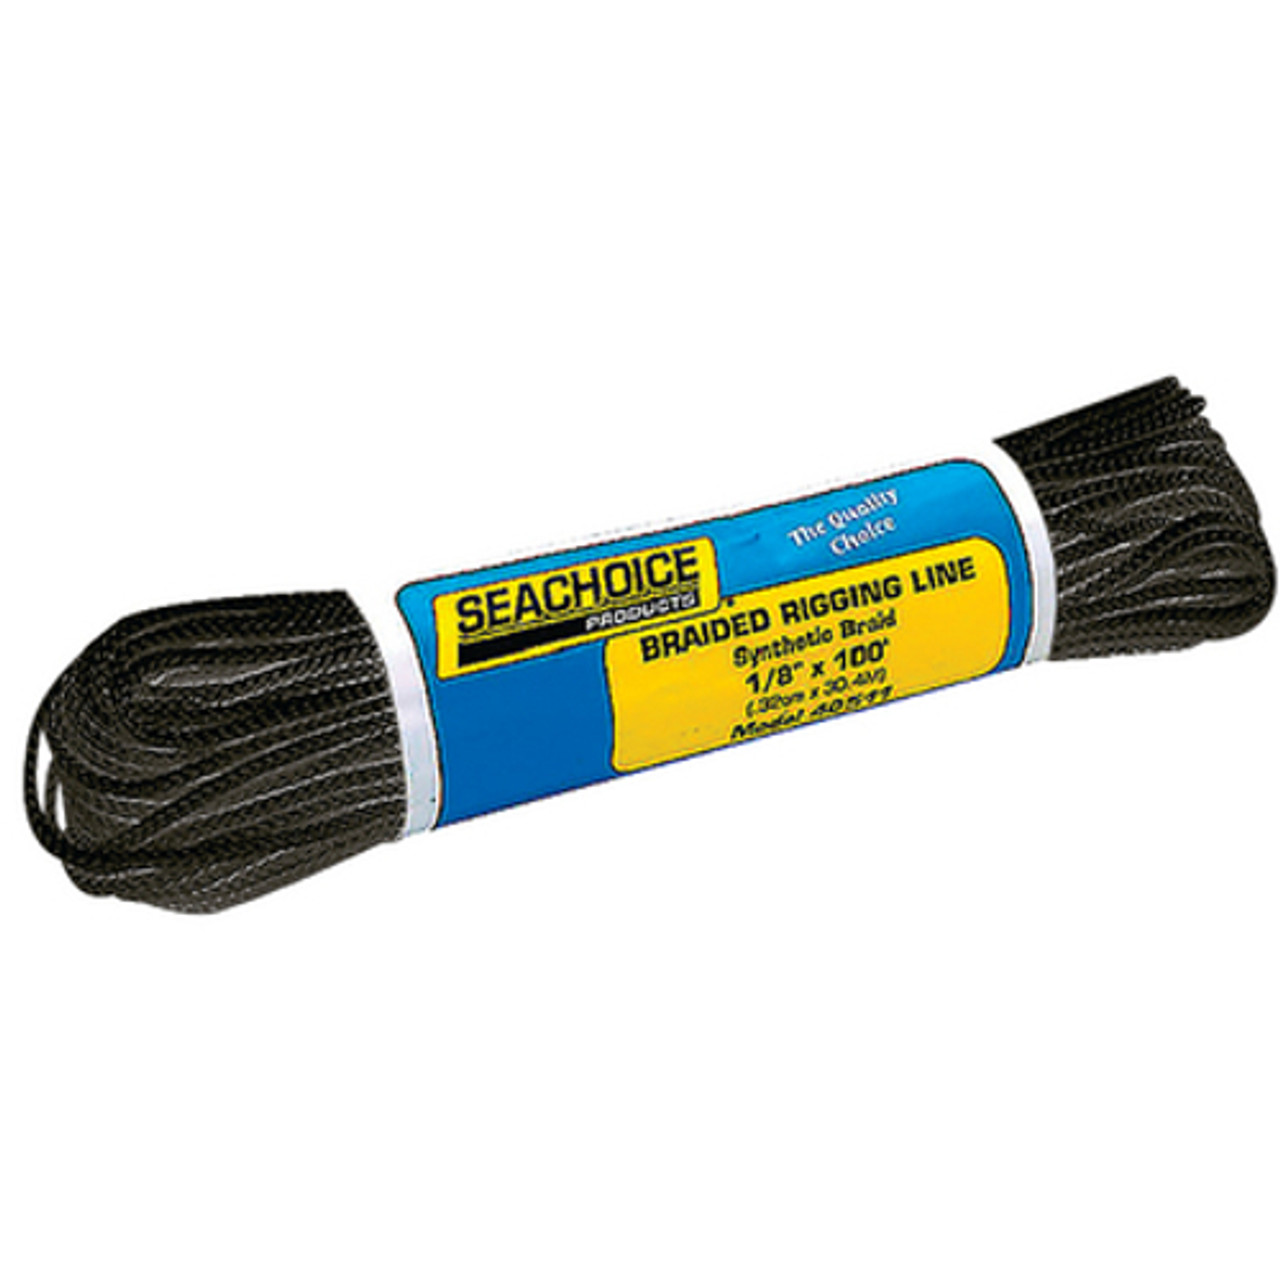 1/8 Inch x 100 Ft Black Braided Outrigger Rigging and General Purpose Line